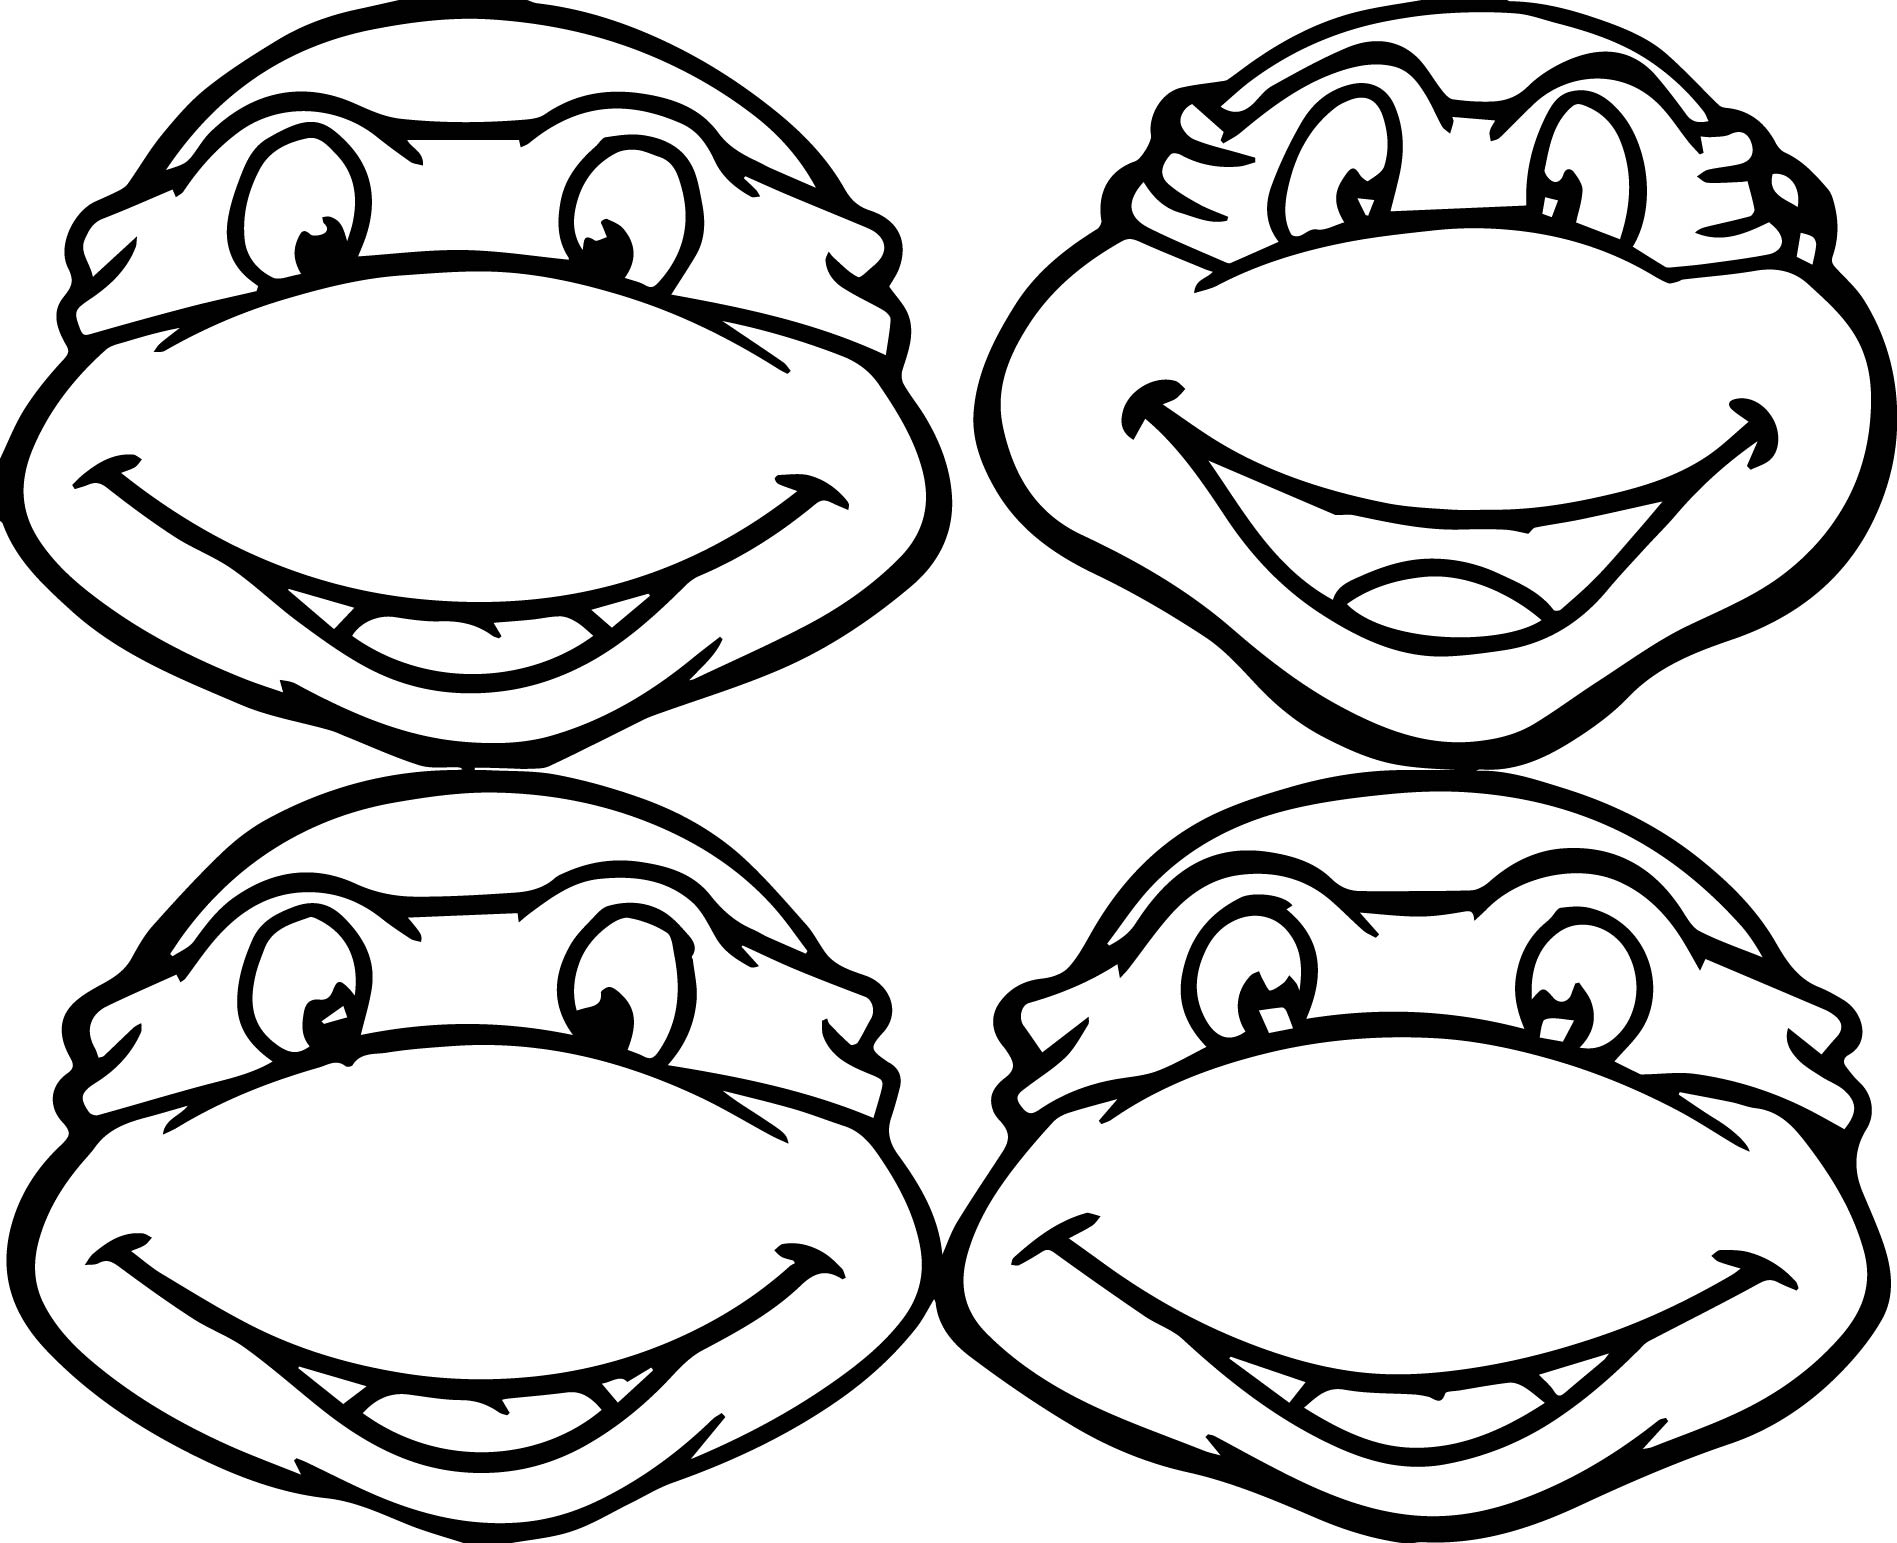 Baby Ninja Turtle Coloring Pages at GetColorings.com | Free printable